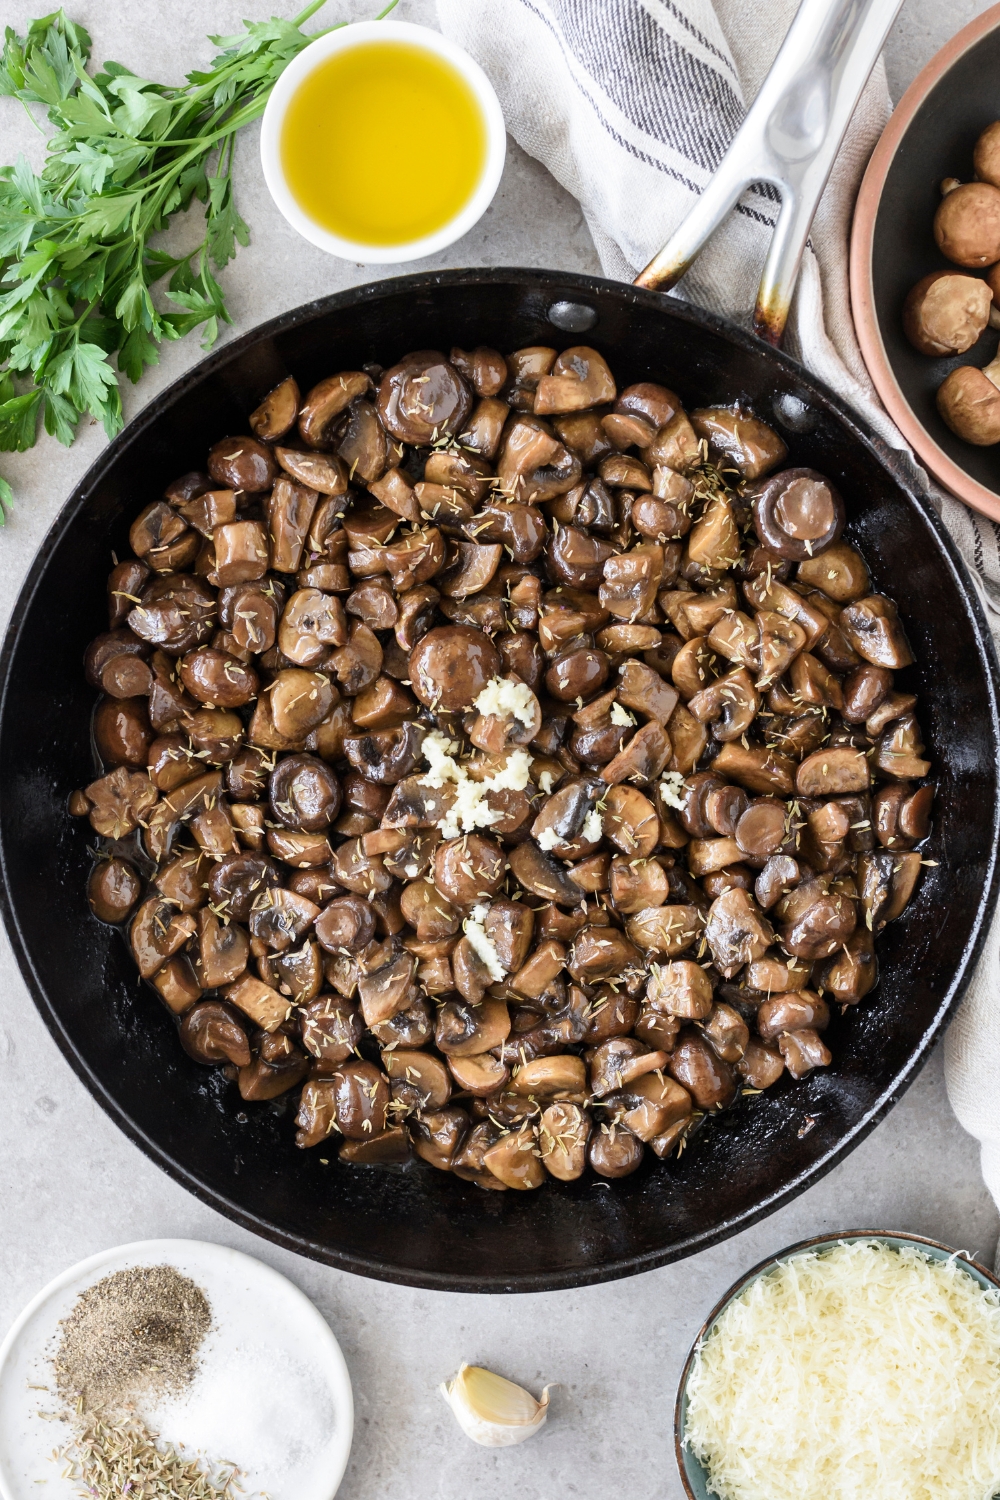 A skillet filled with cooked mushroom slices and minced garlic added but not yet mixed together.